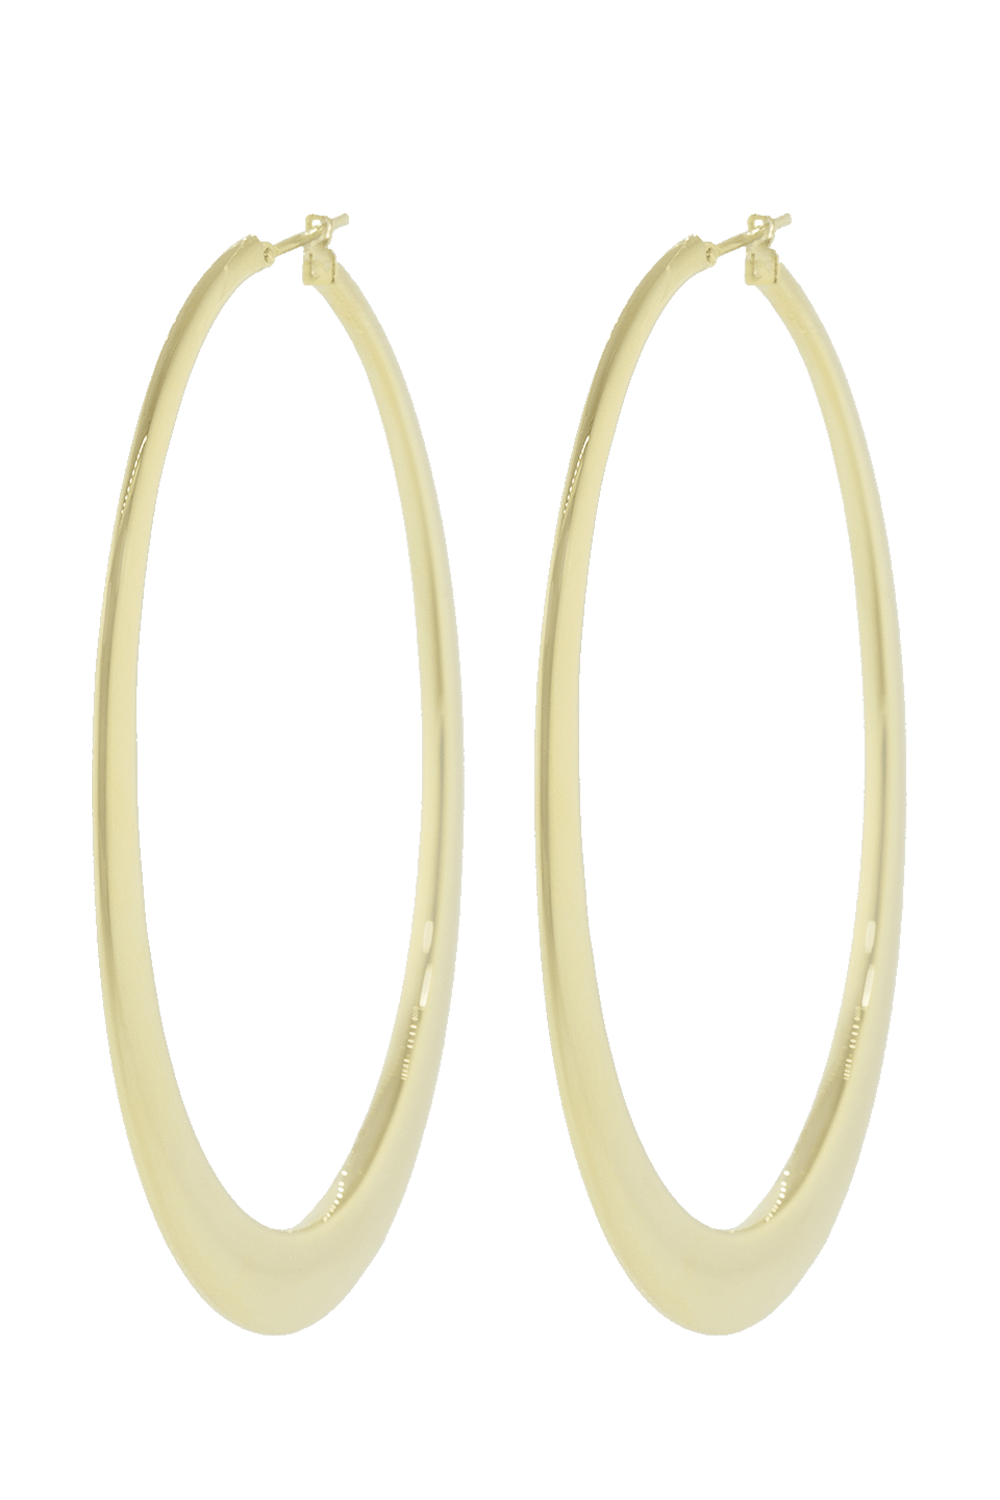 SIDNEY GARBER-Oval Crescent Hoop Earrings-YELLOW GOLD